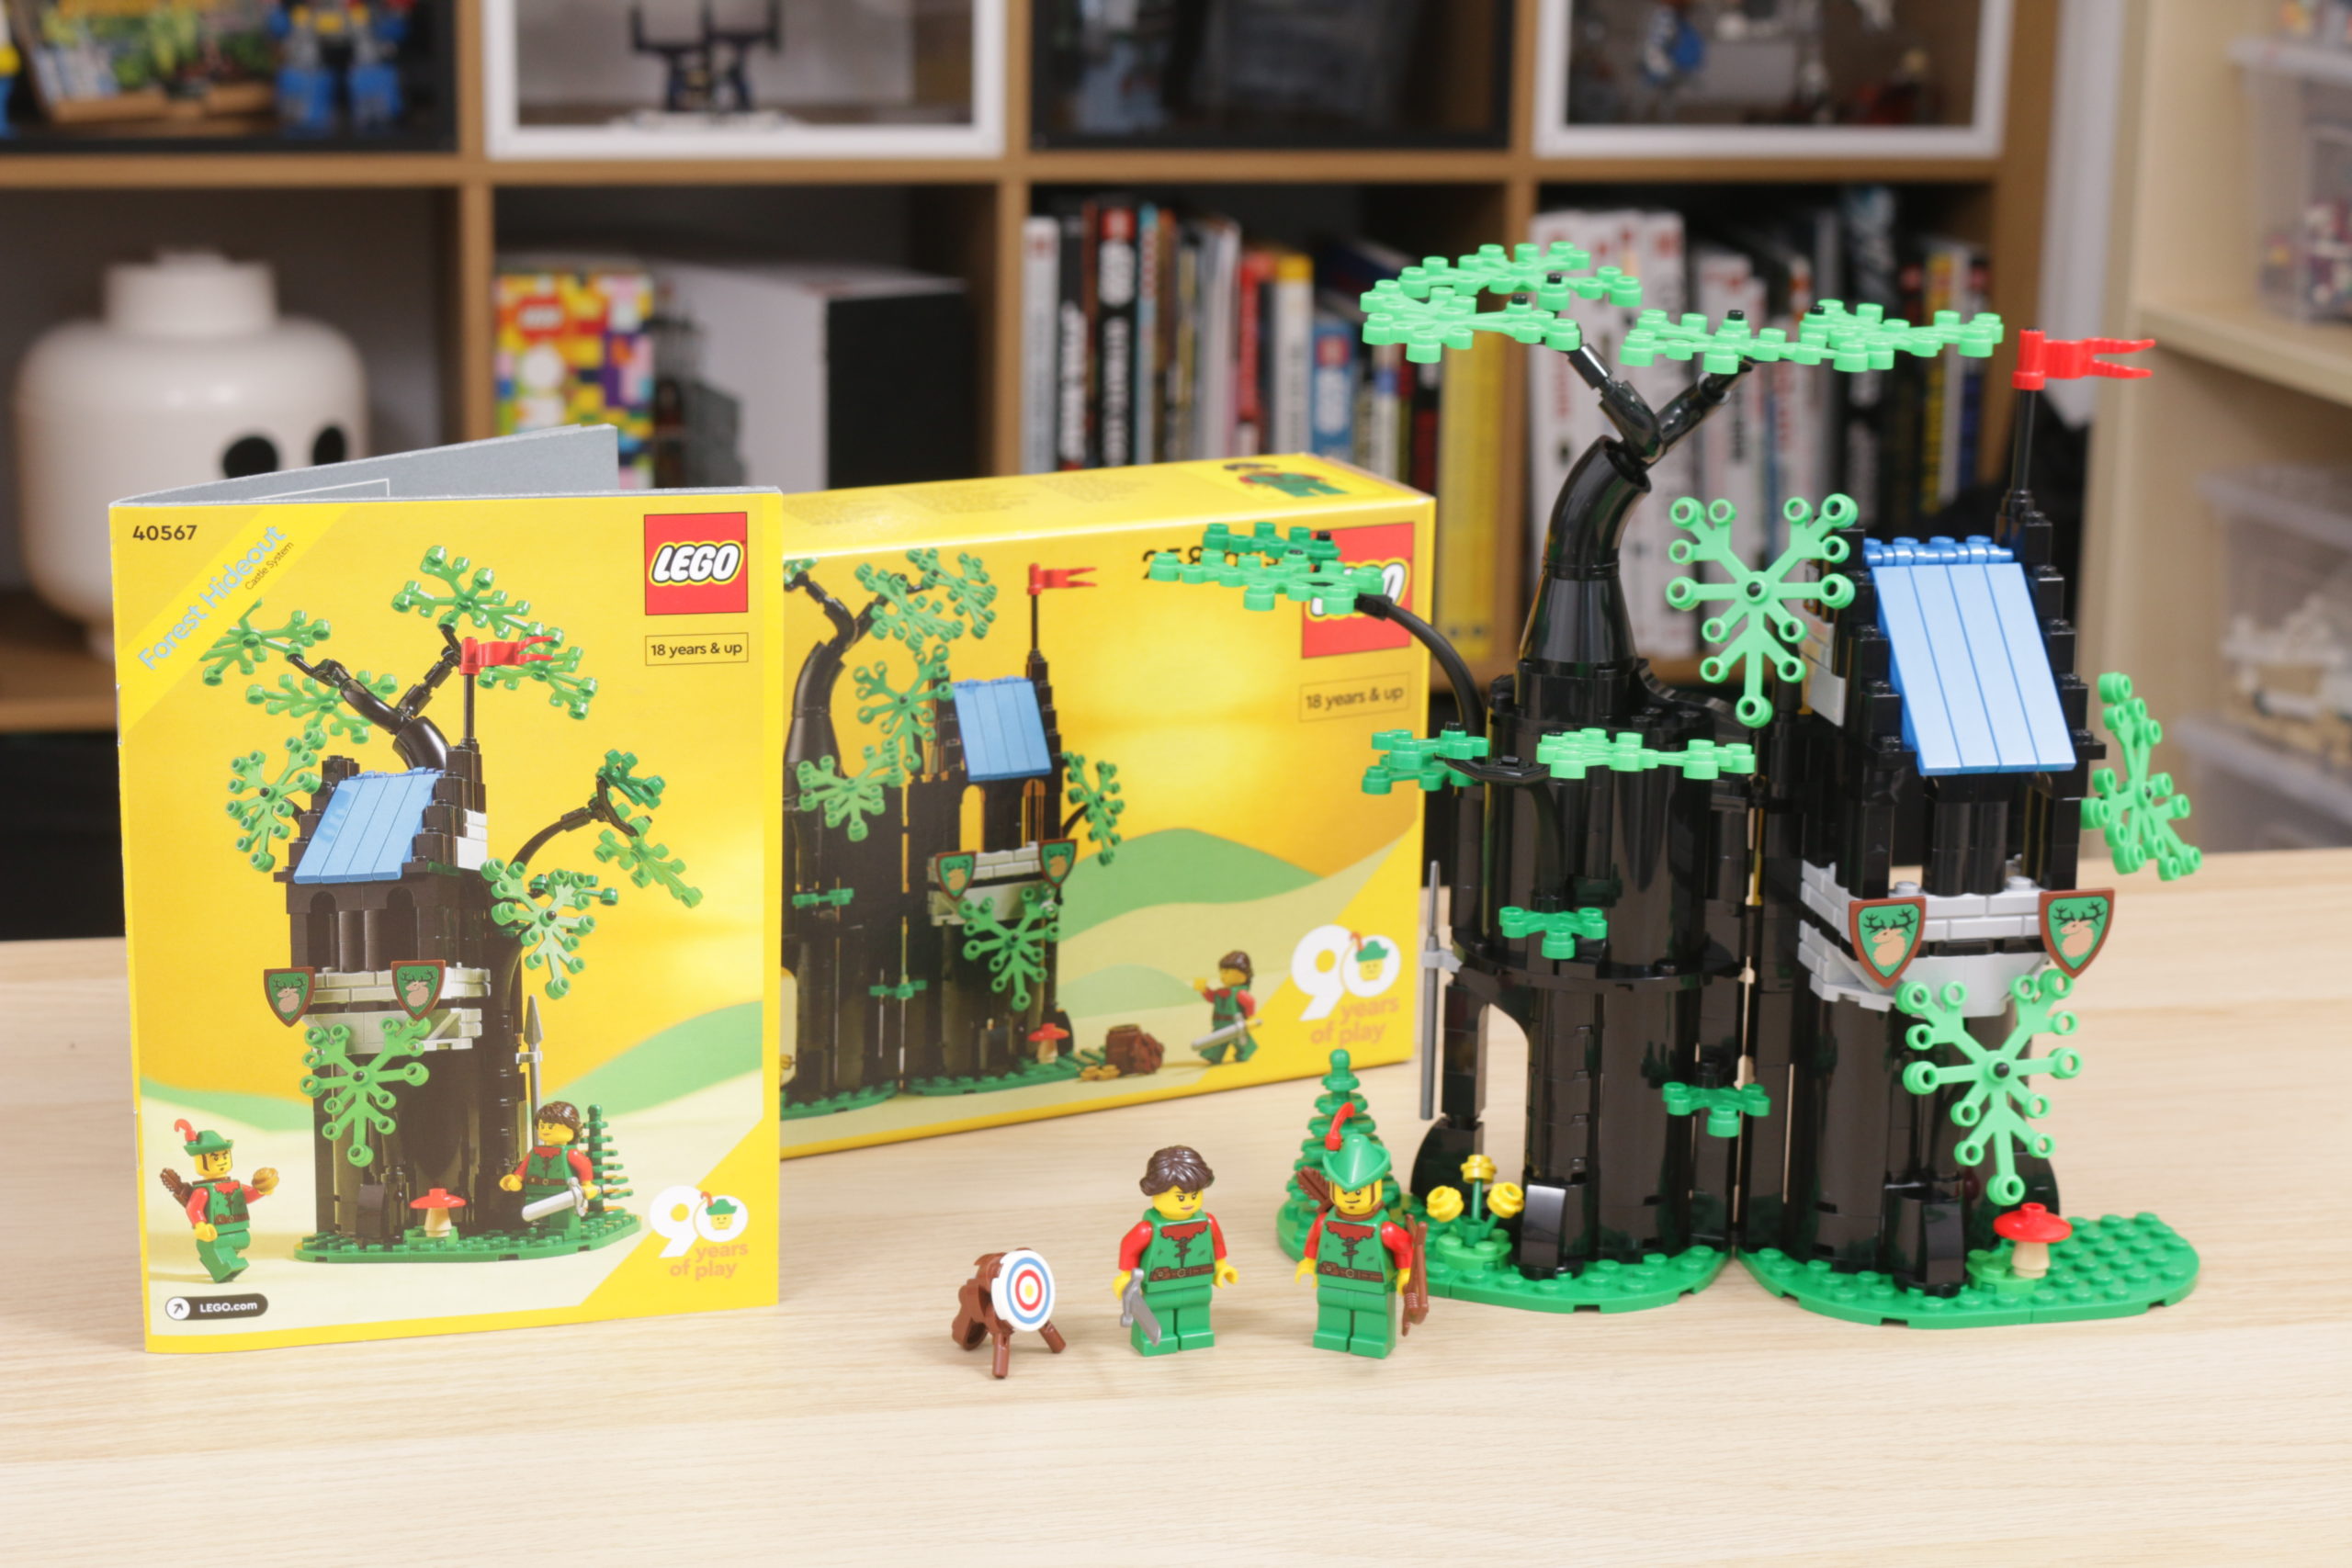 amplitude Ensomhed Final LEGO Castle 40567 Forest Hideout gift-with-purchase review